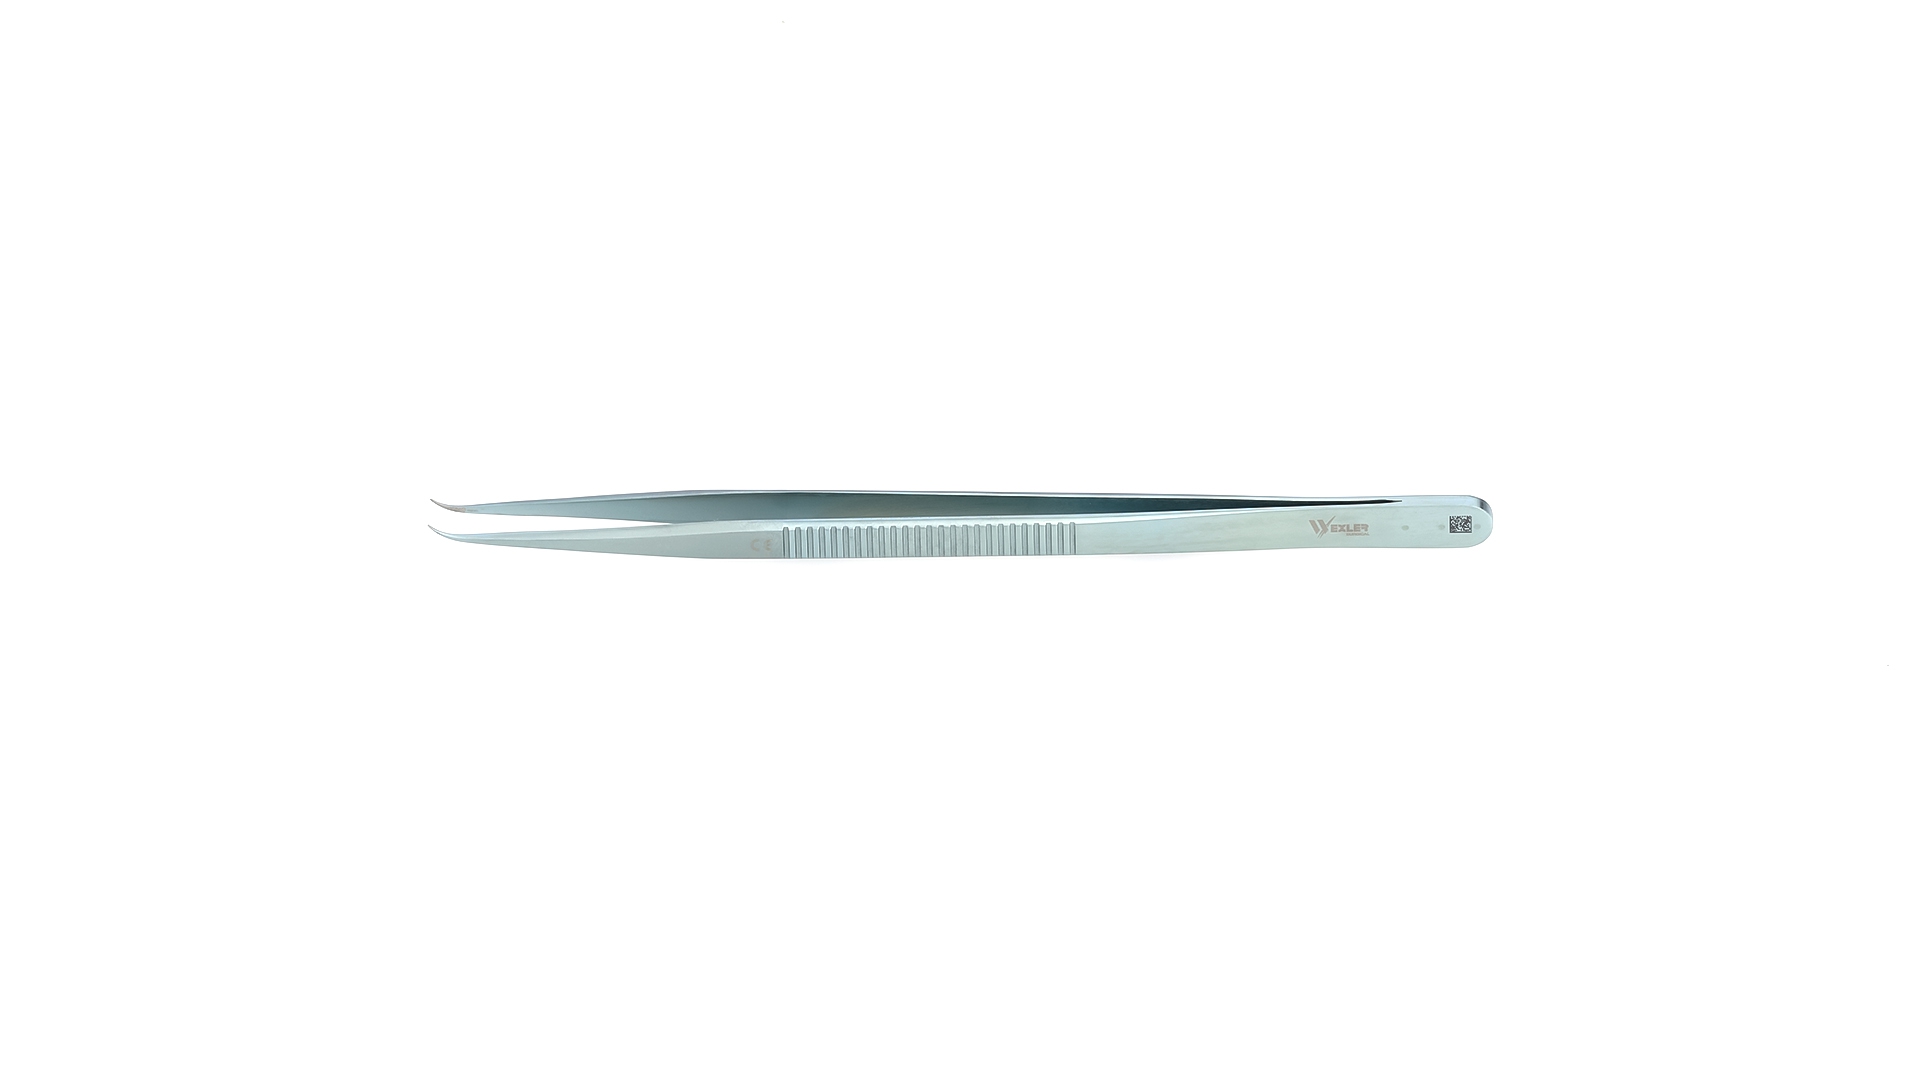 Jeweler Style Forceps #3  - Curved 0.3mm TC coated tips